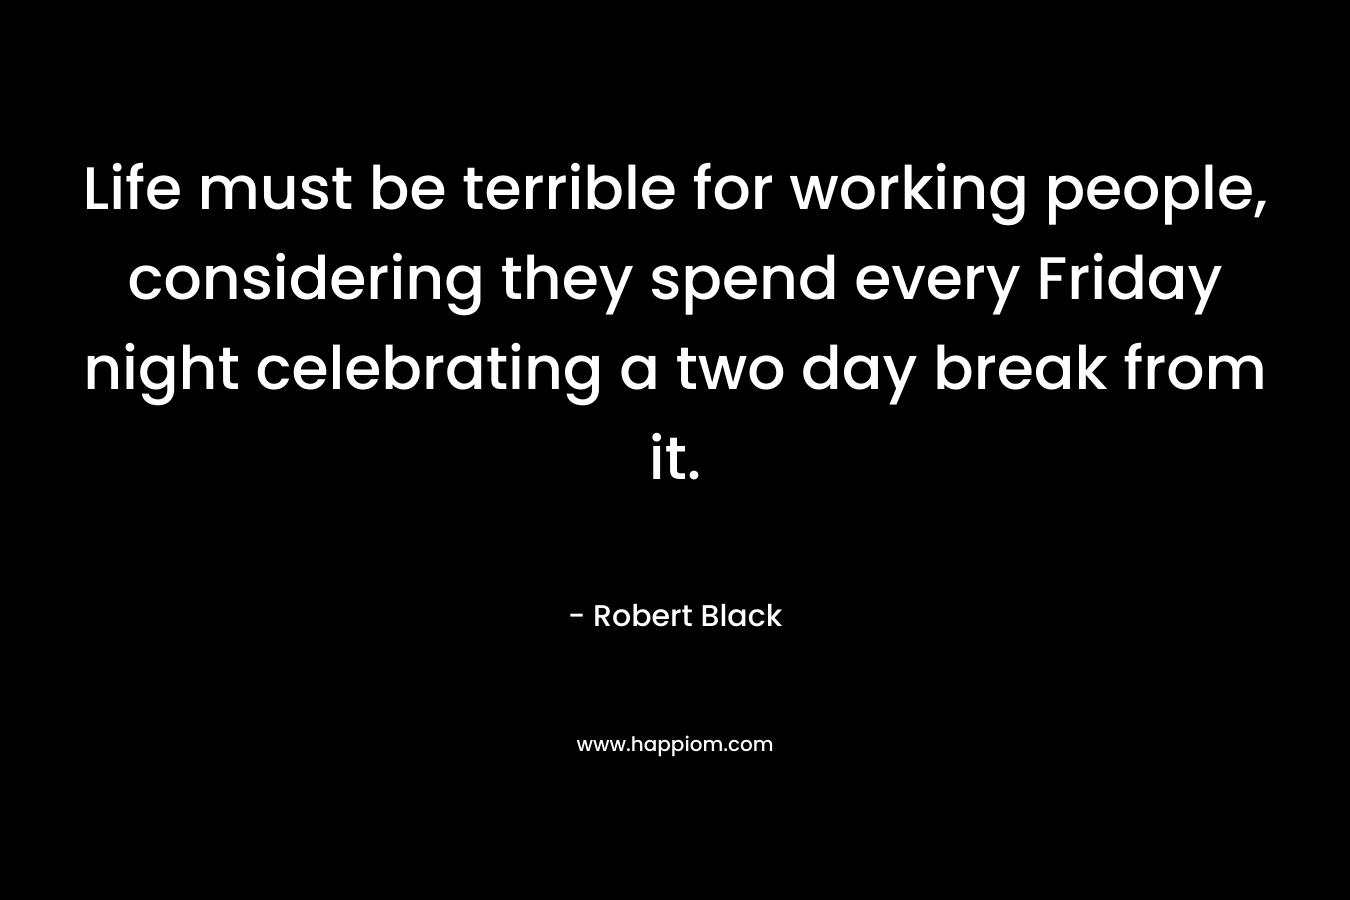 Life must be terrible for working people, considering they spend every Friday night celebrating a two day break from it.